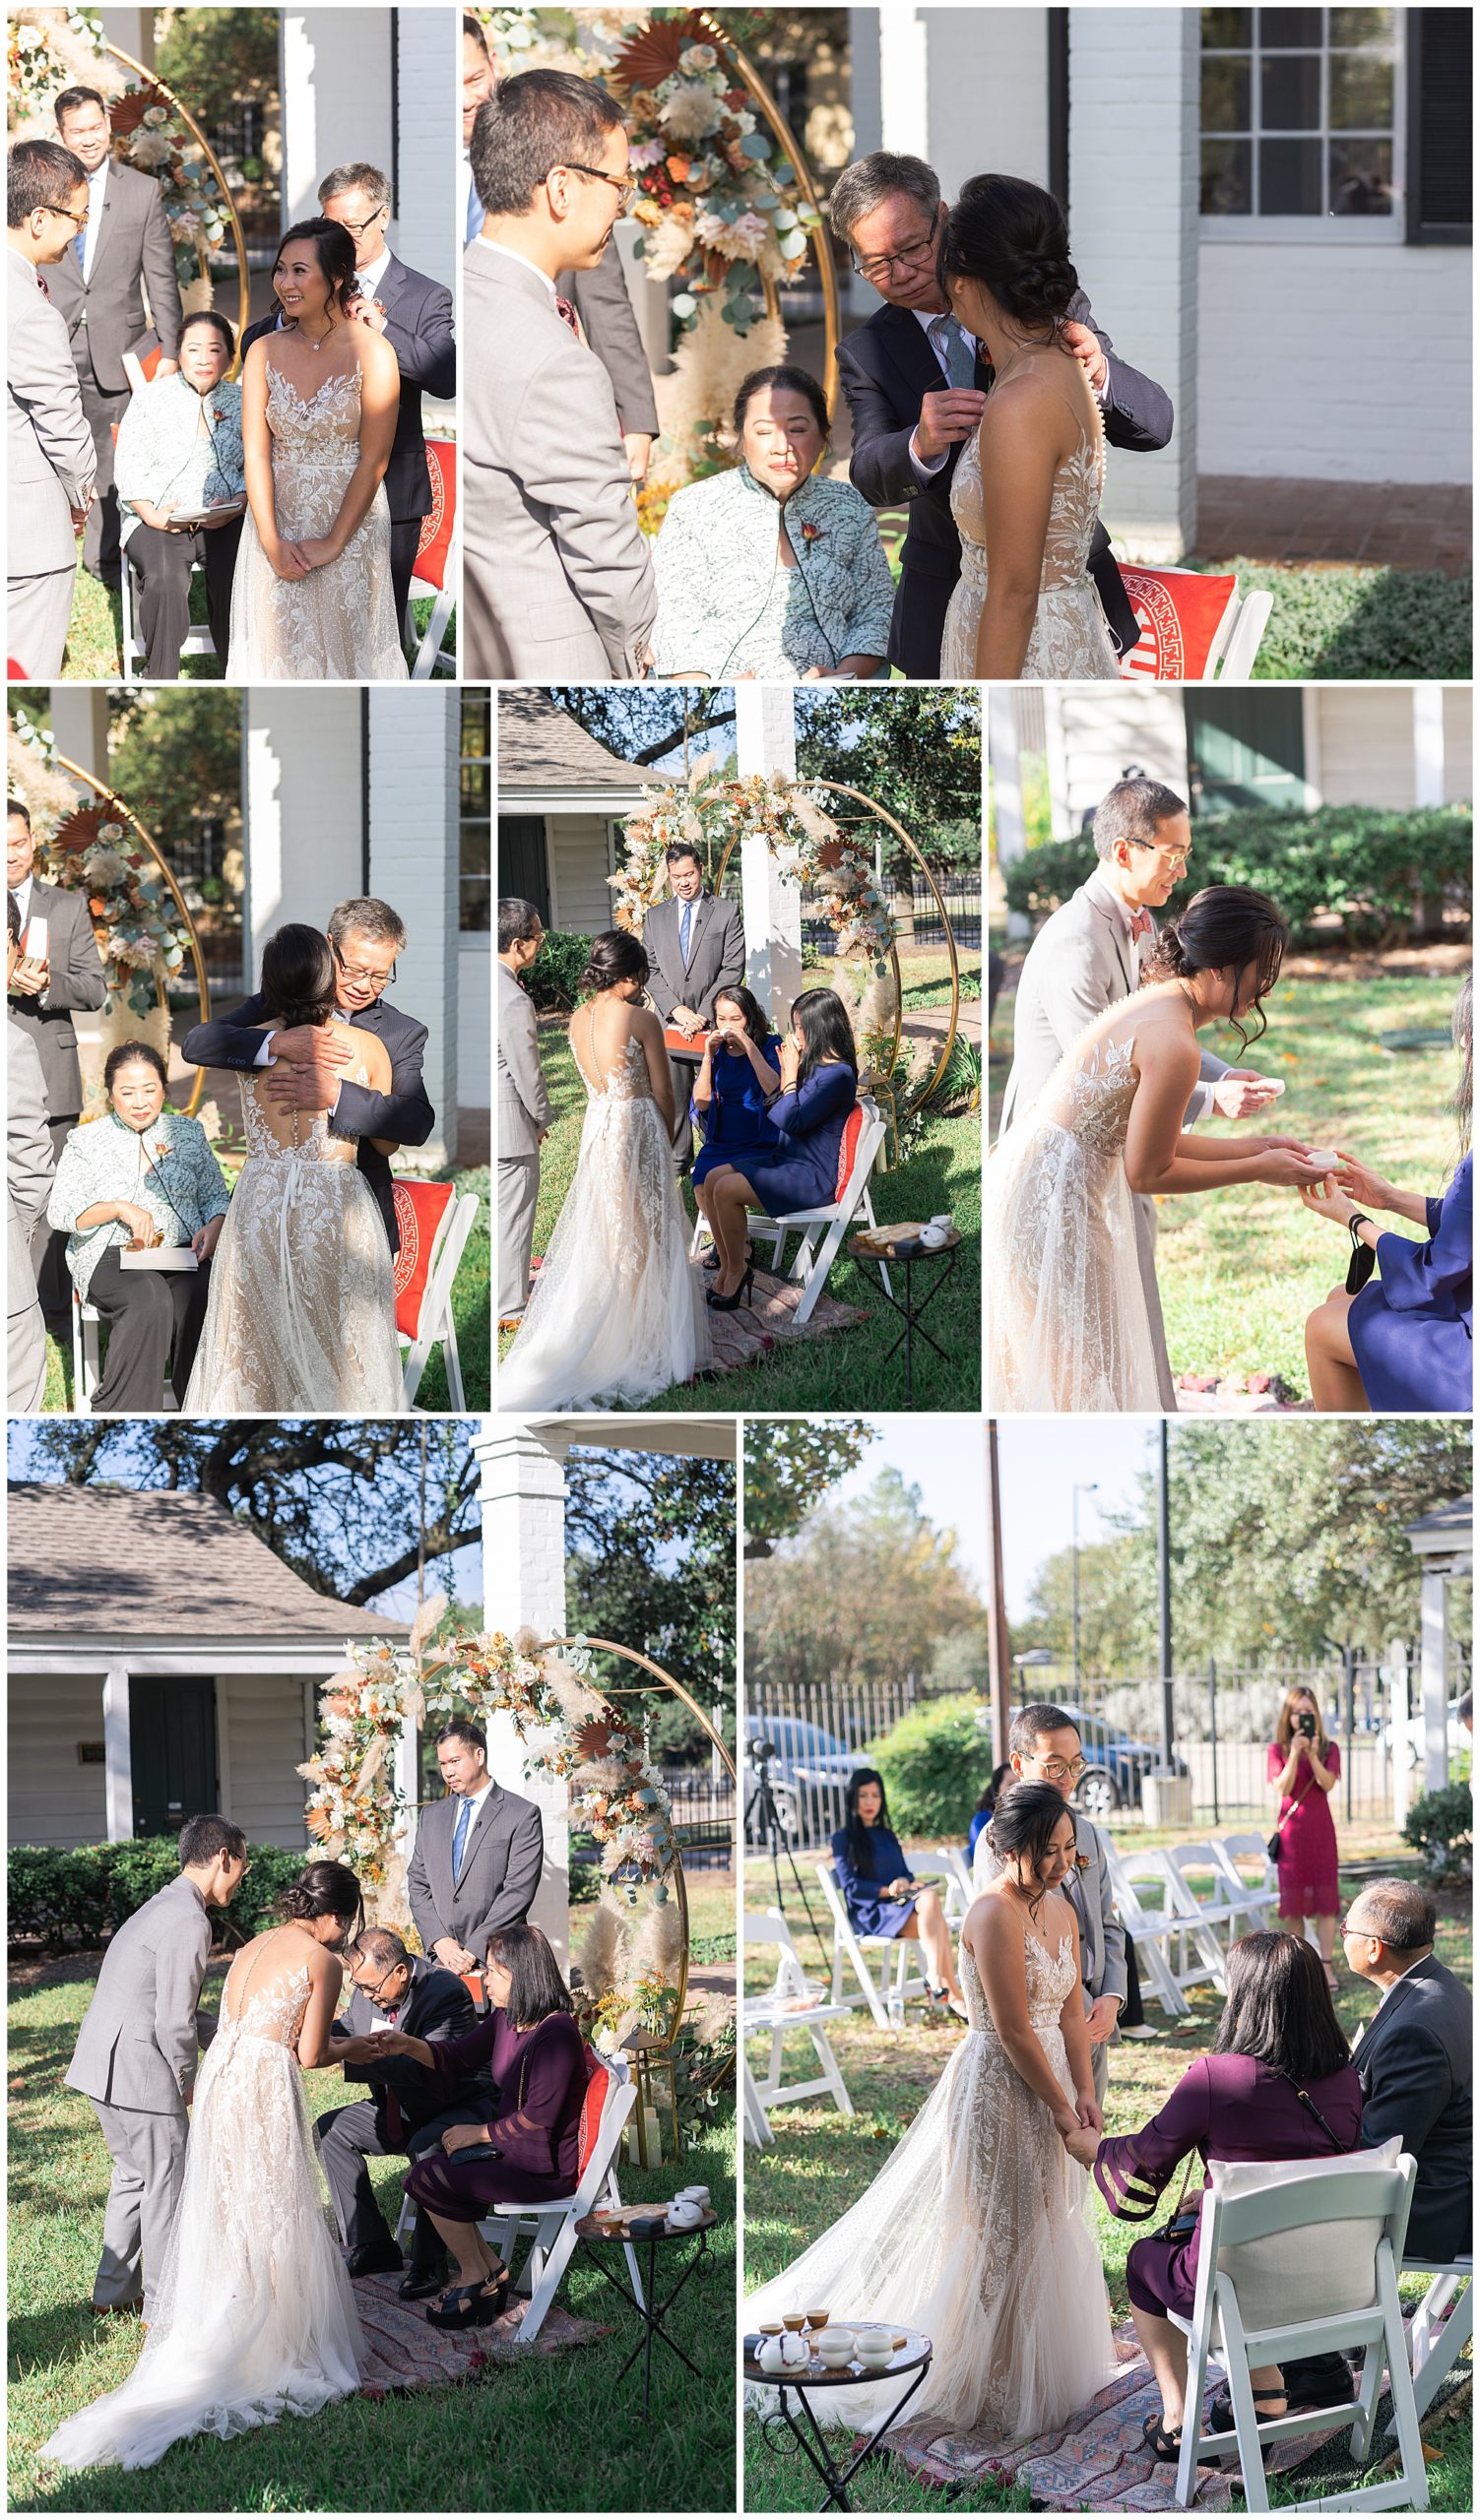 tea ceremony with bride and groom's families at Houston wedding at the Heritage Society by Swish and Click Photography